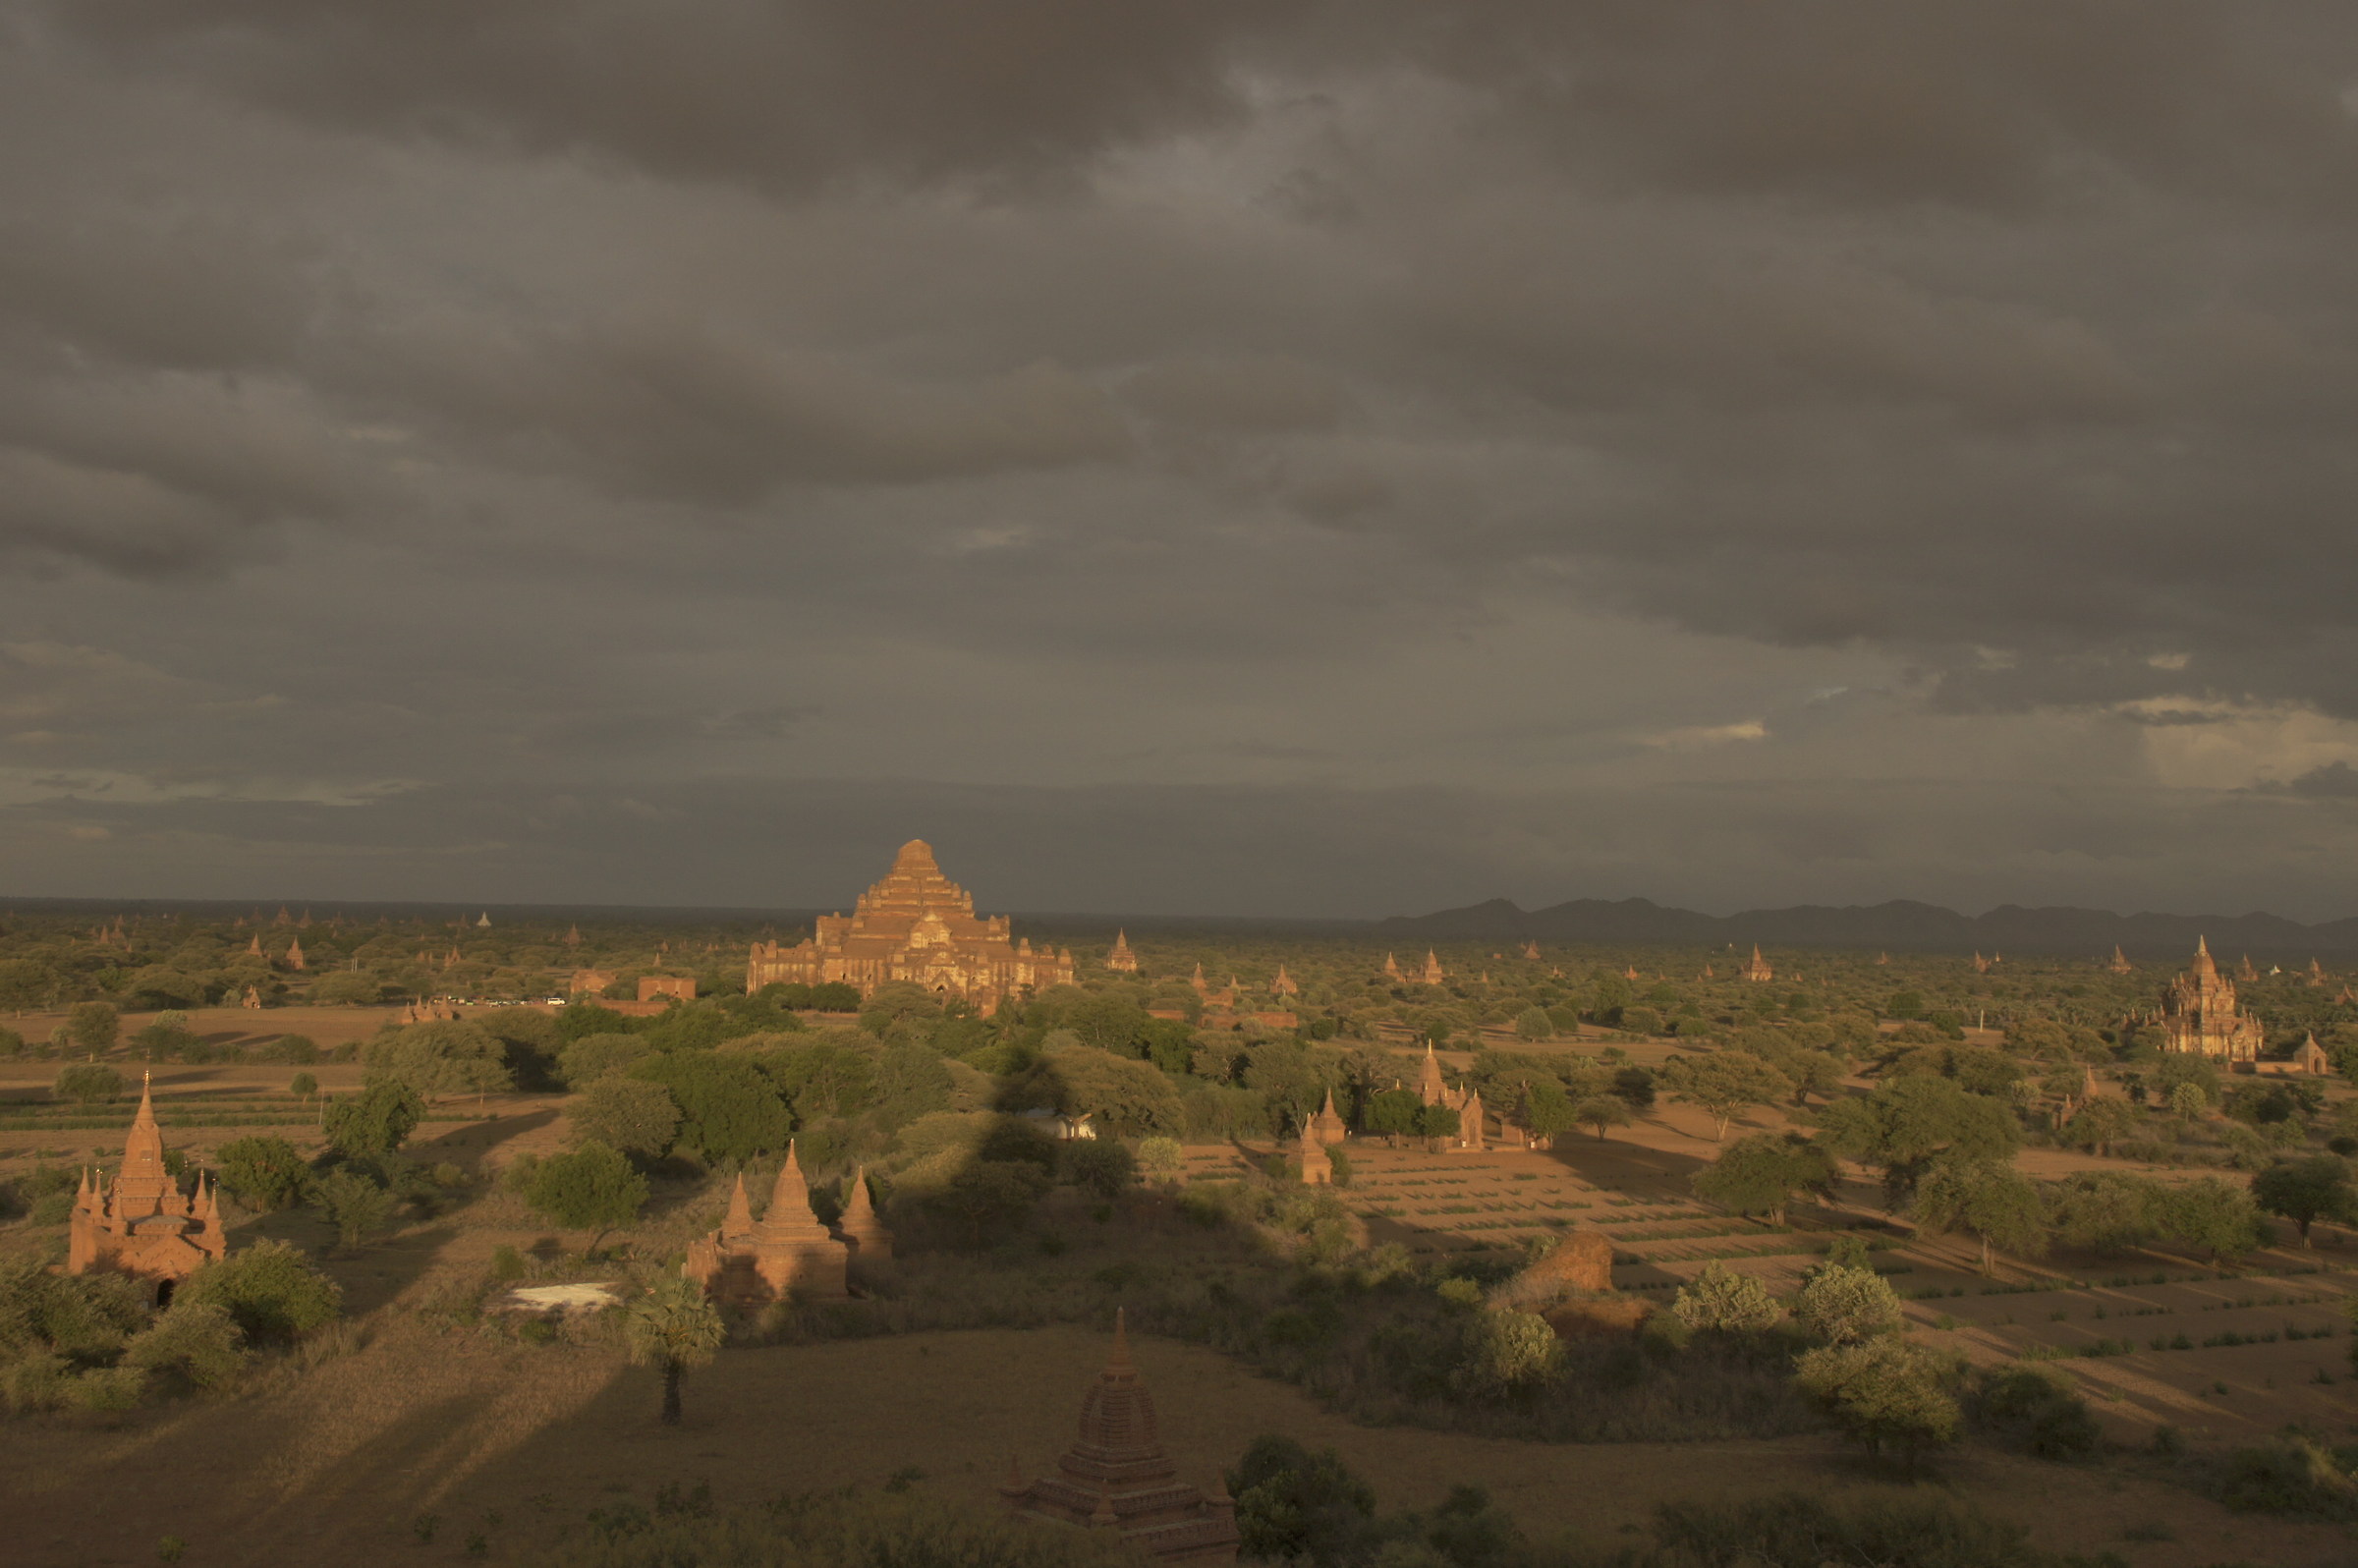 The plain of temples...